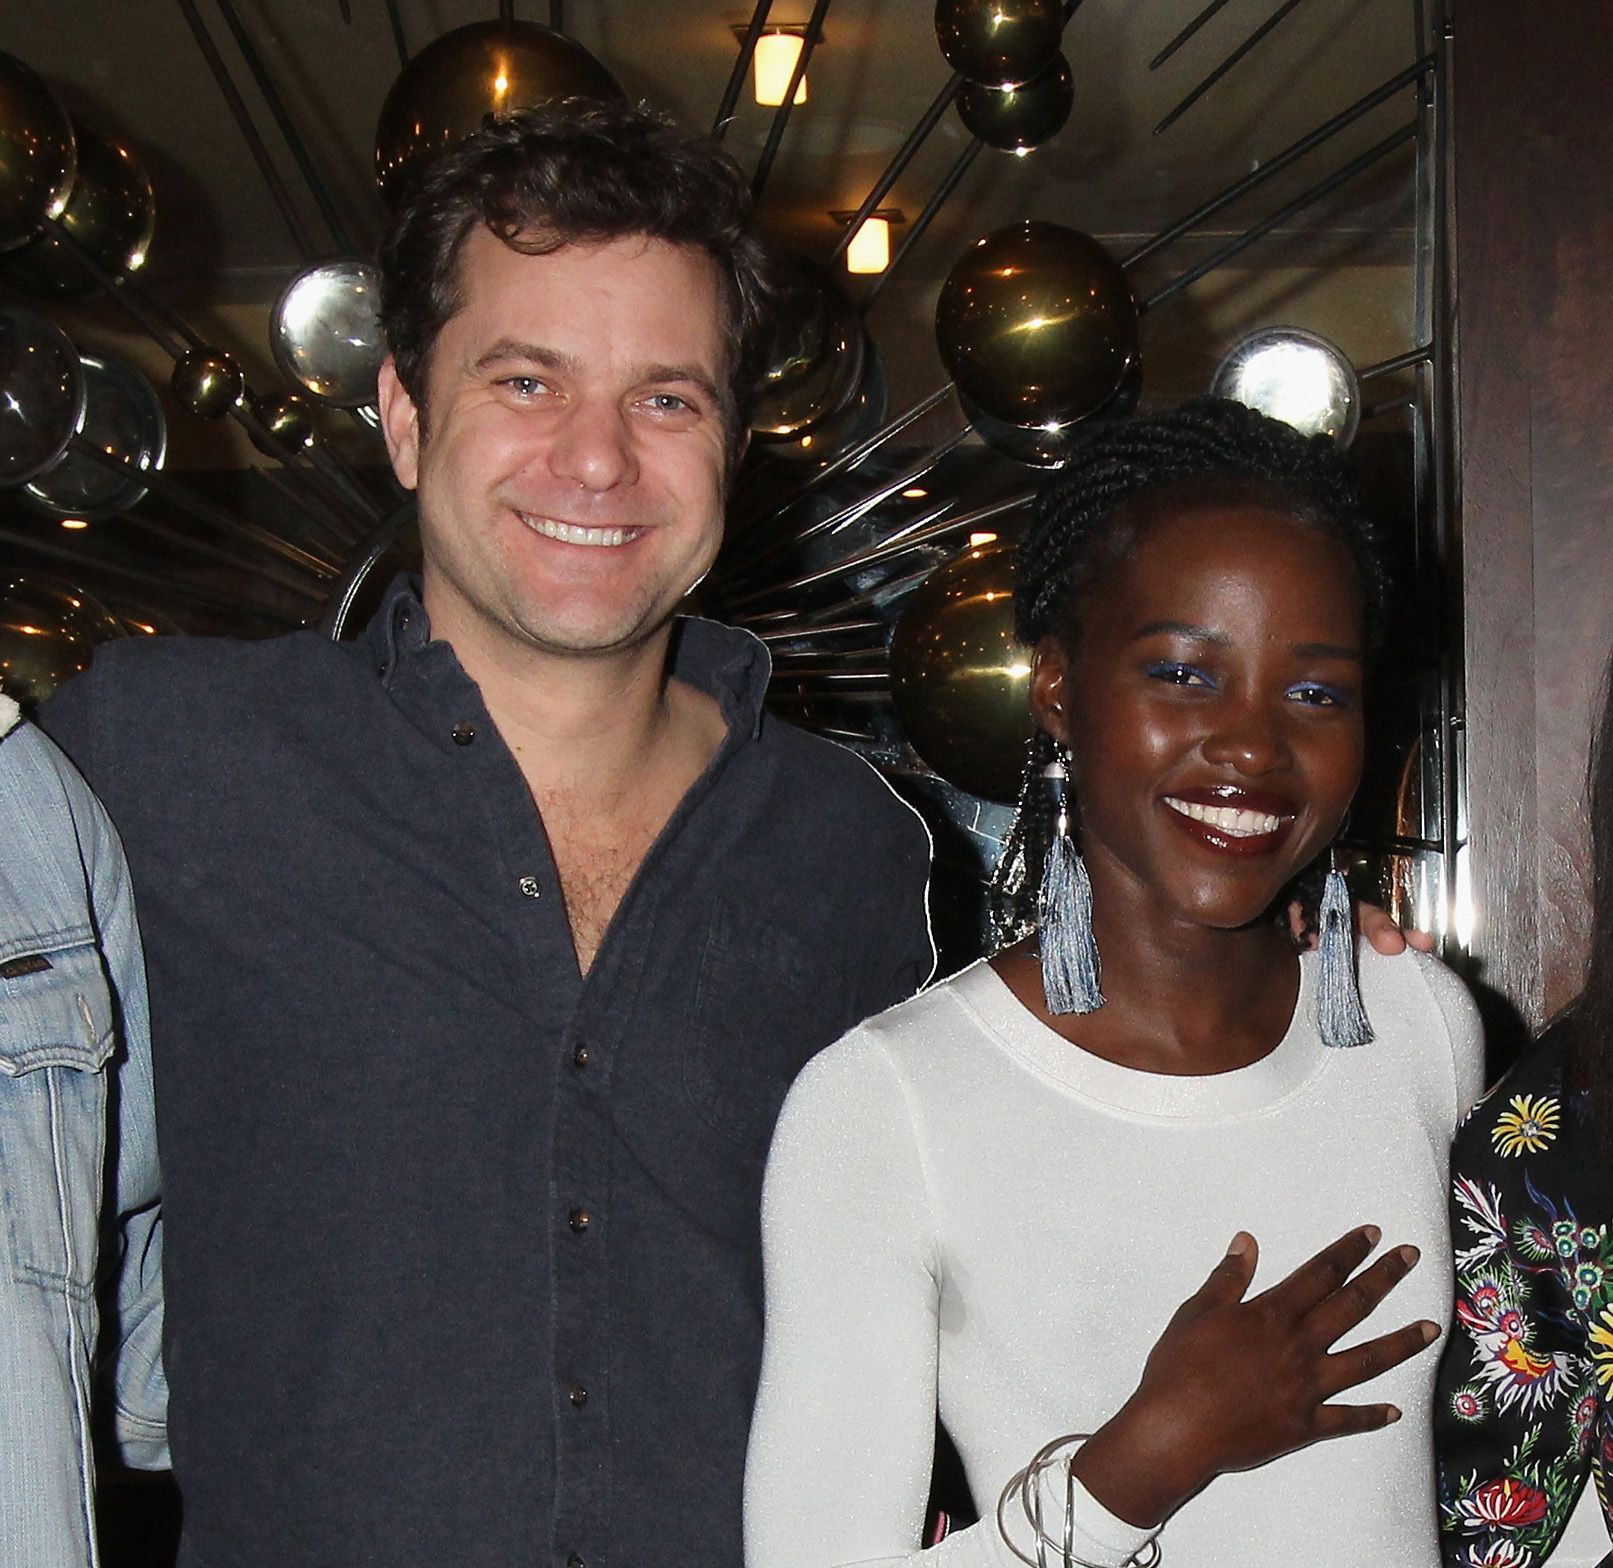 S12 Ep71: 12/11/23 - Lupita Nyong’o and Joshua Jackson Spark Dating Rumors & Was Bradley Cooper Working on a Food Truck?